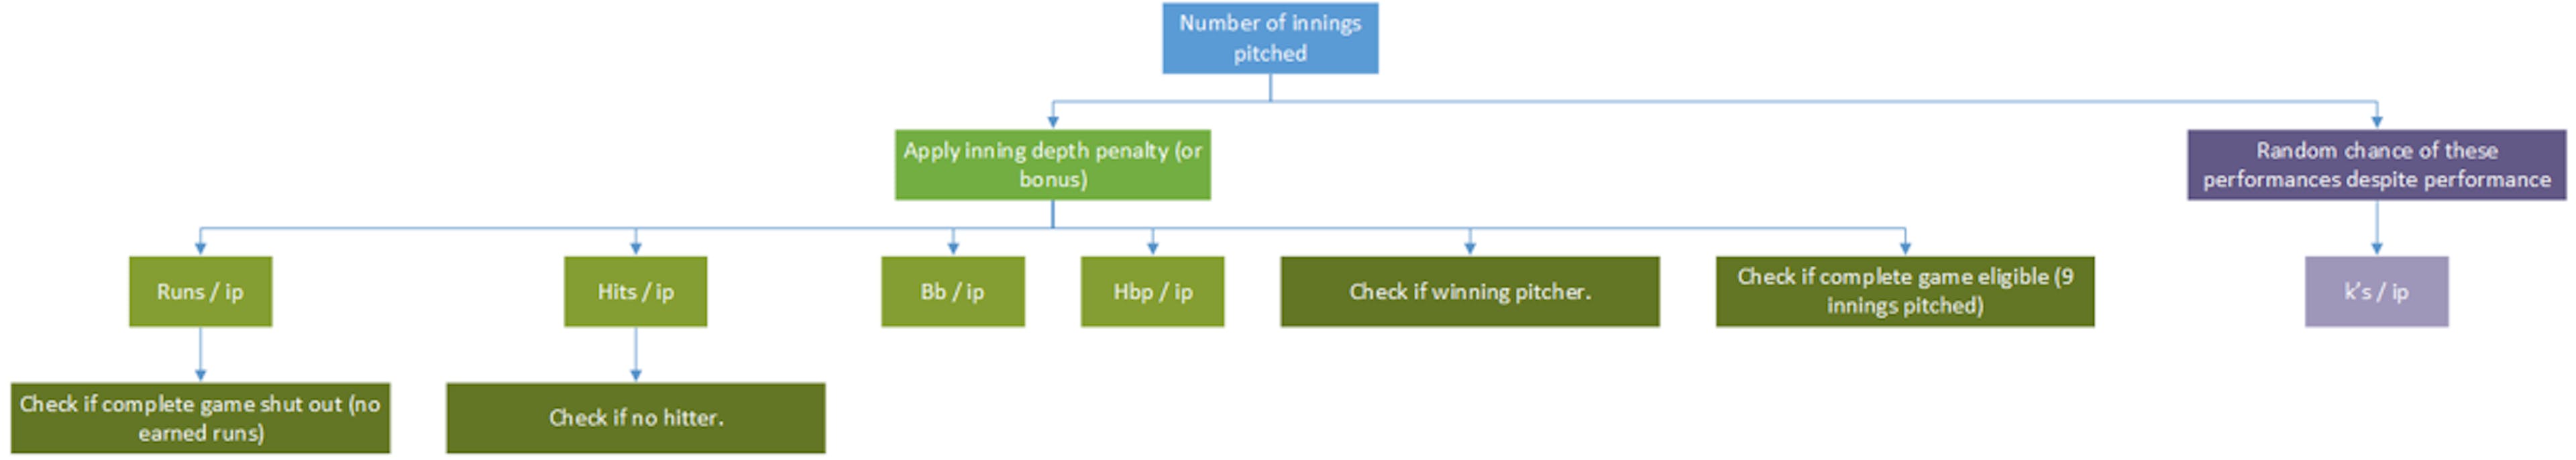 Image by Author: Pitching simulation flowchart.